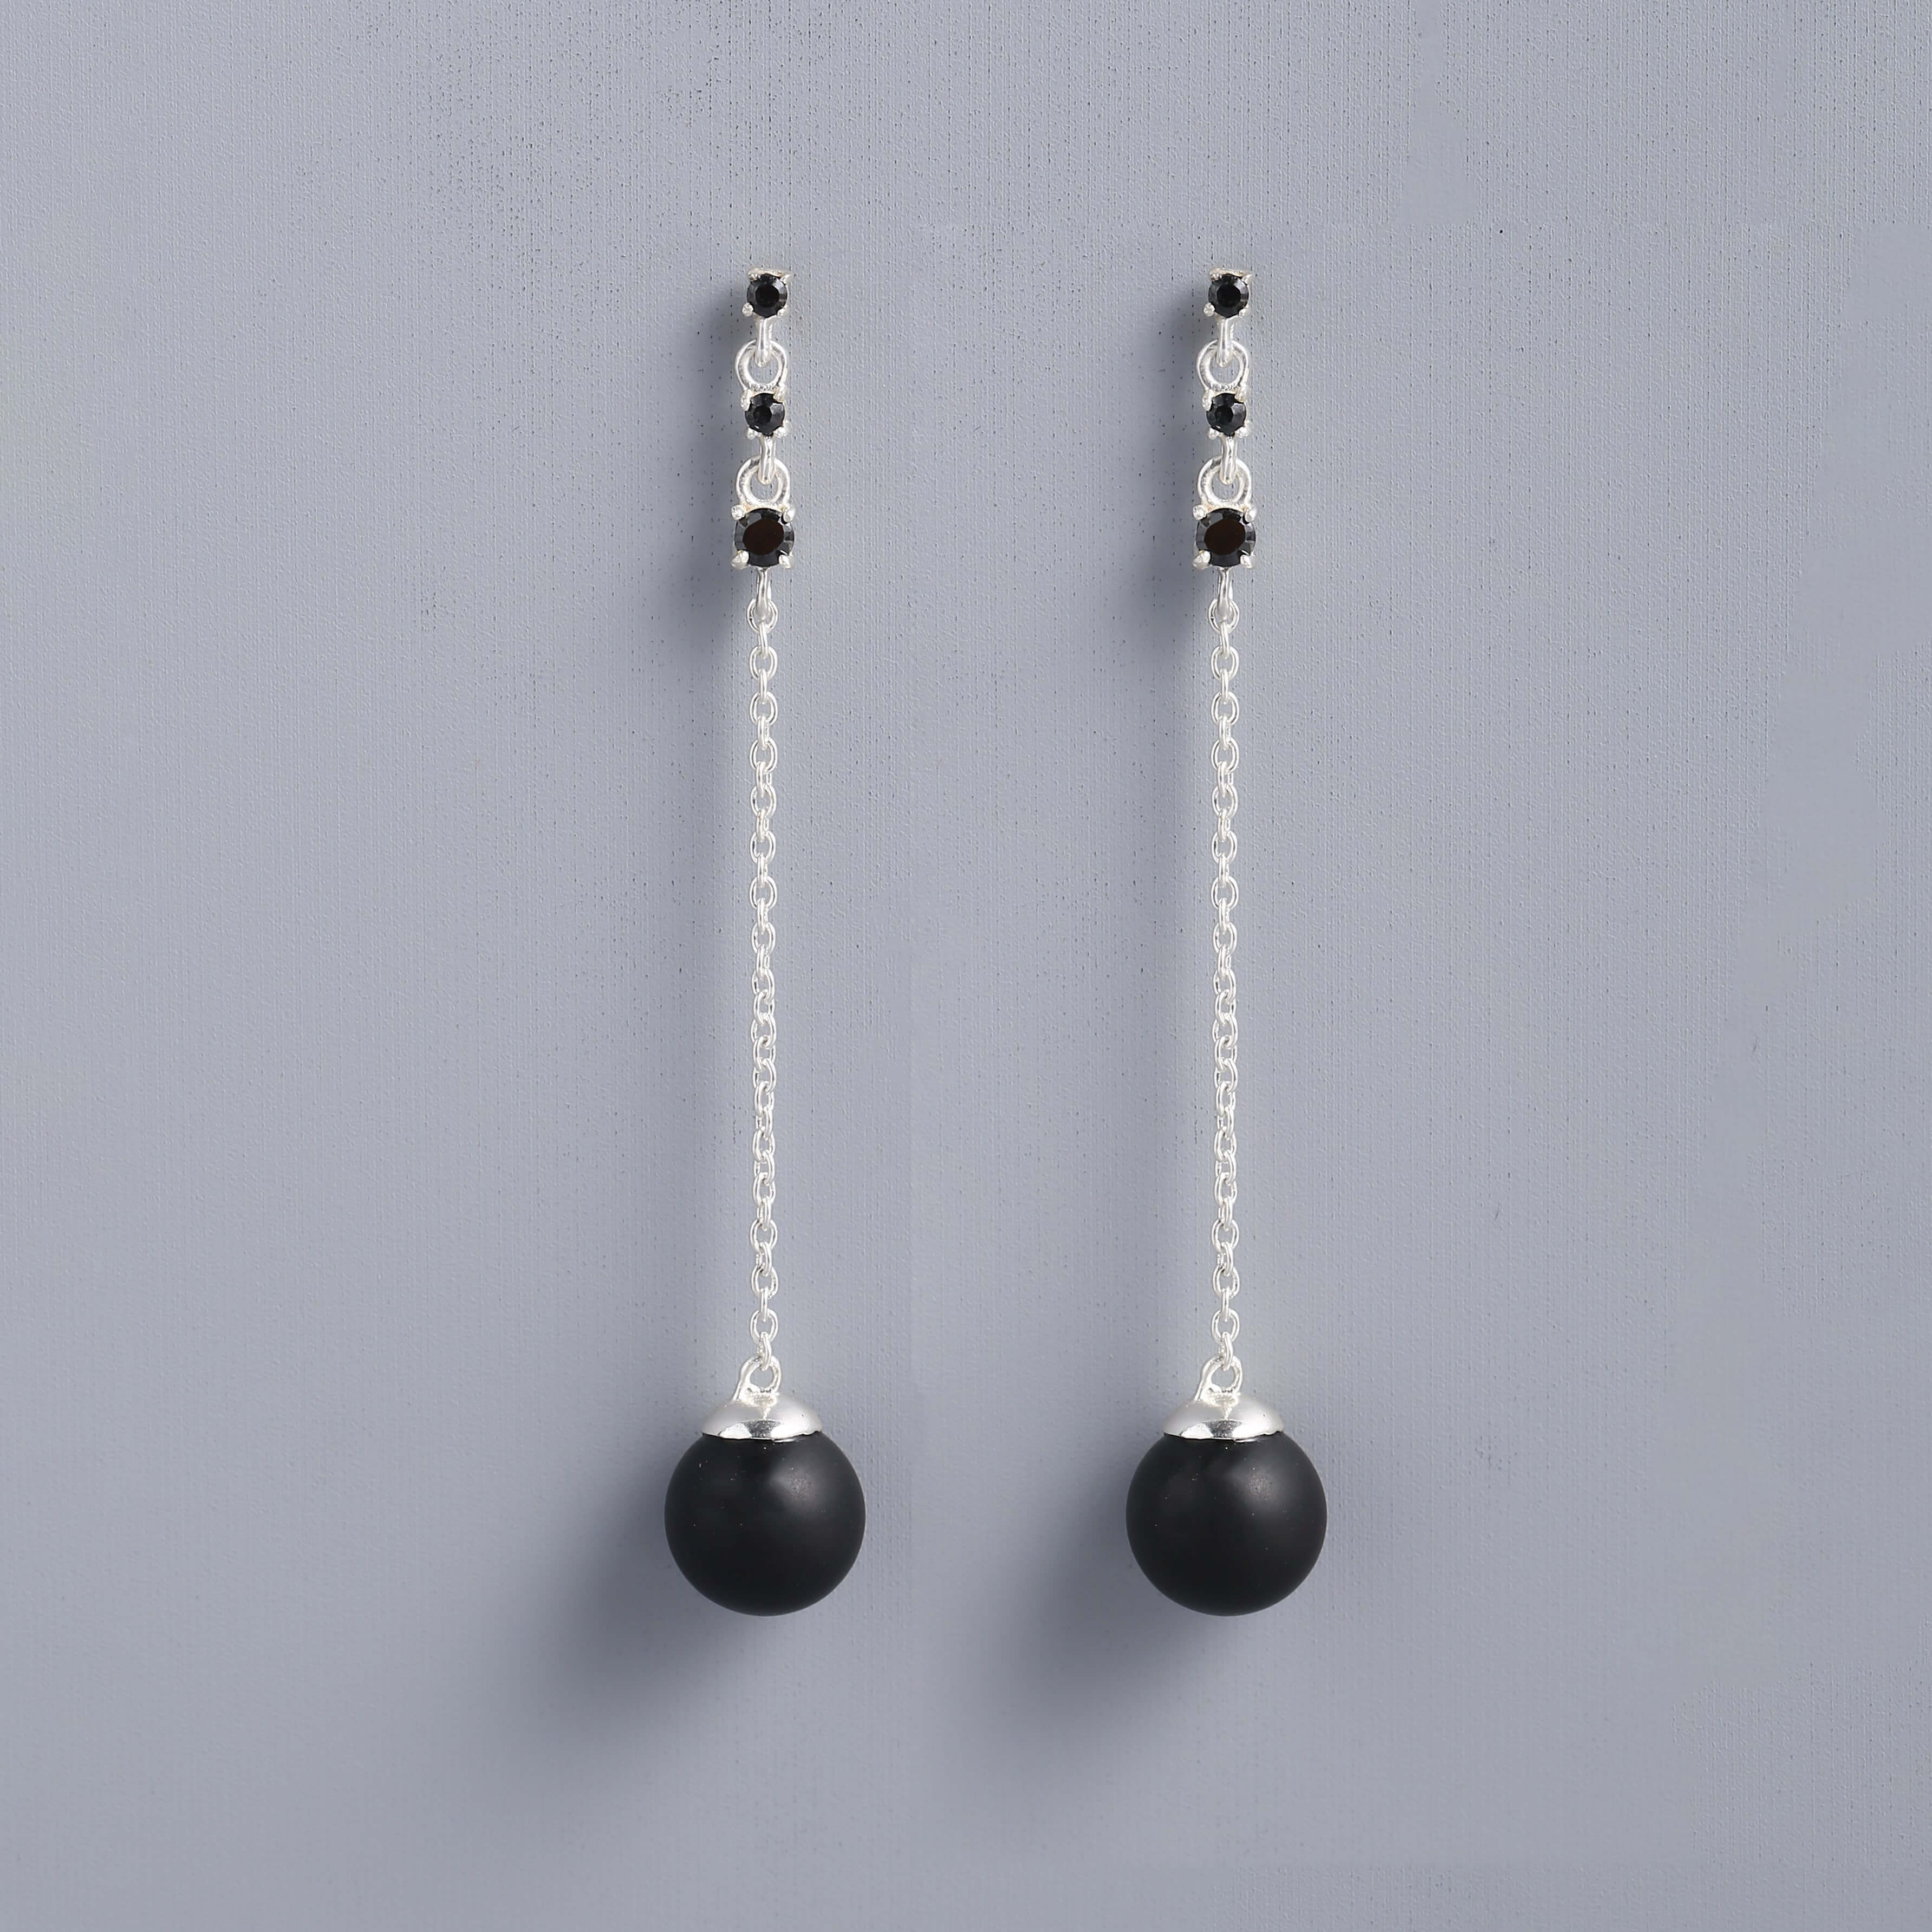 Black Onyx Drops For Her